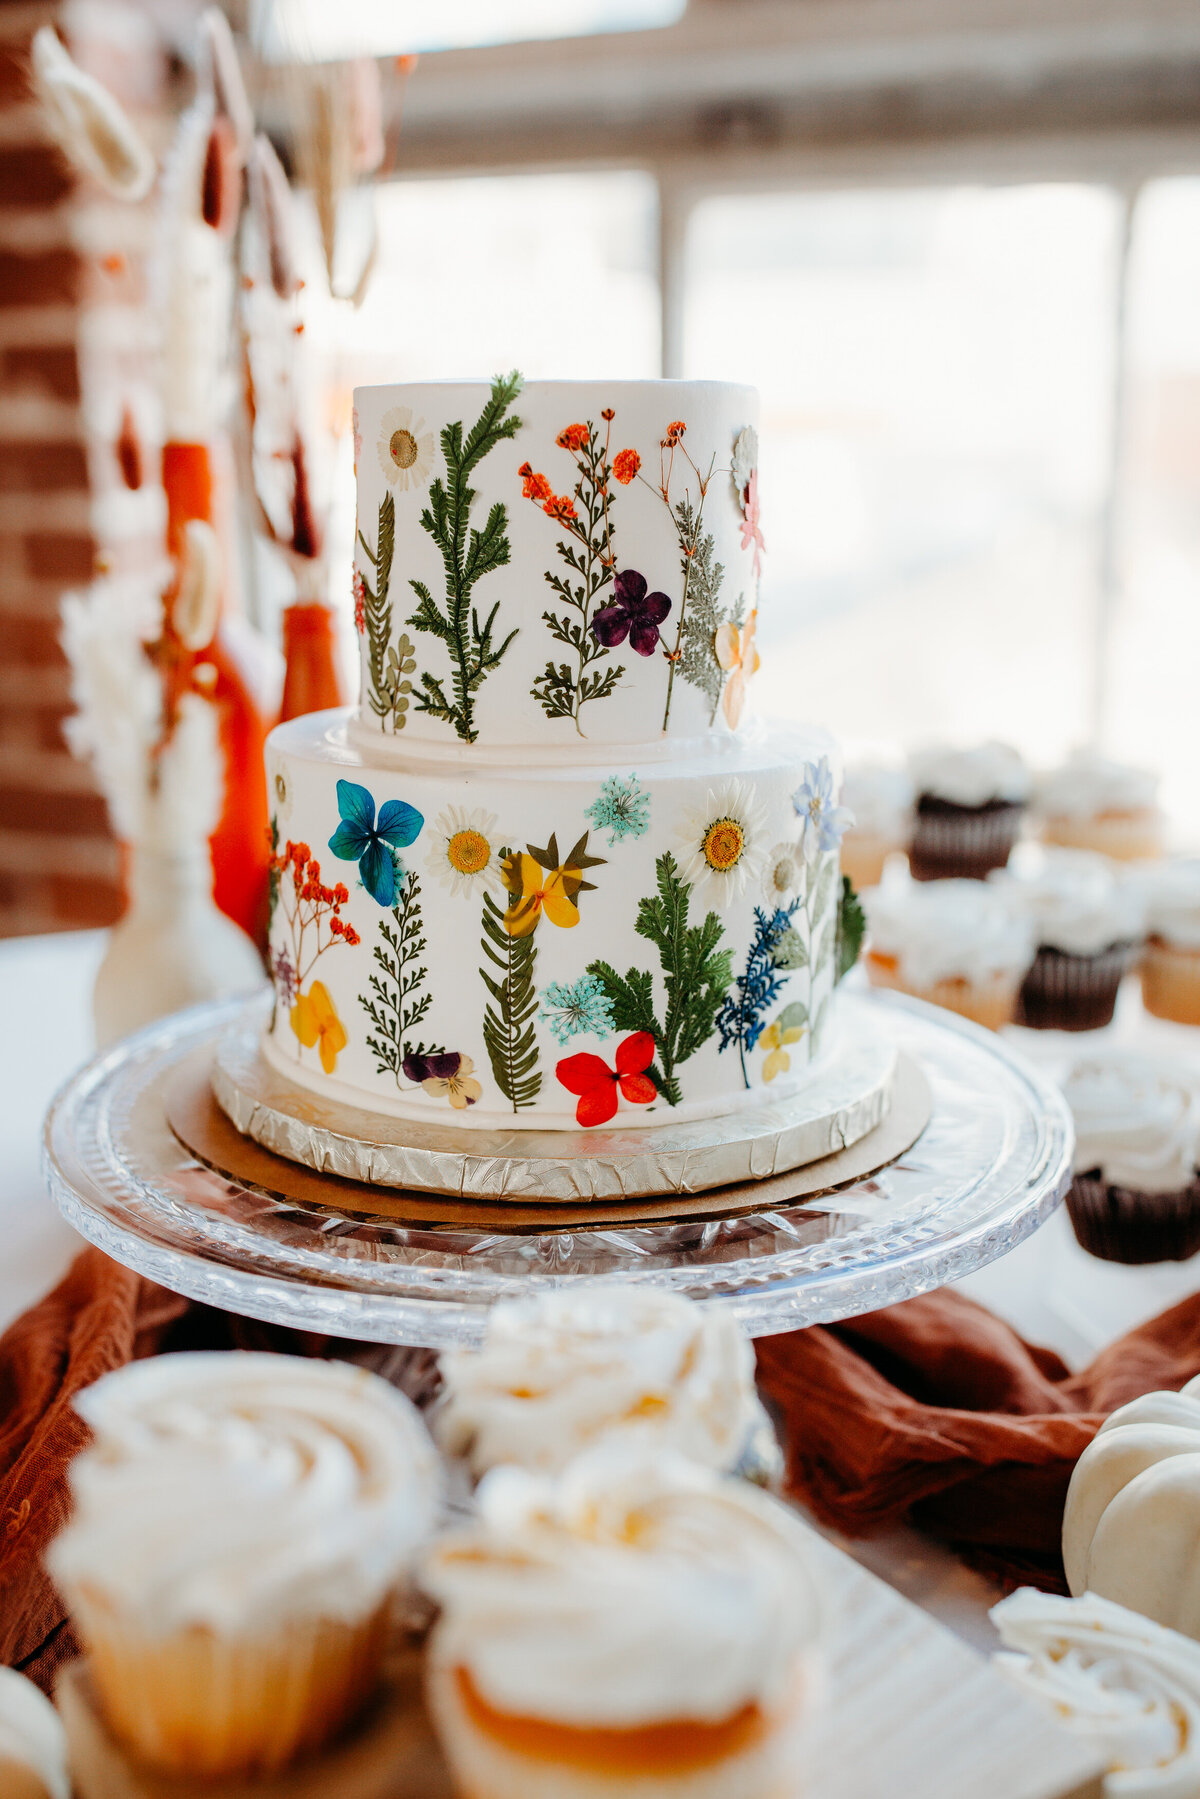 Colorful wildflower-themed wedding cake on display, surrounded by cupcakes on a dessert table